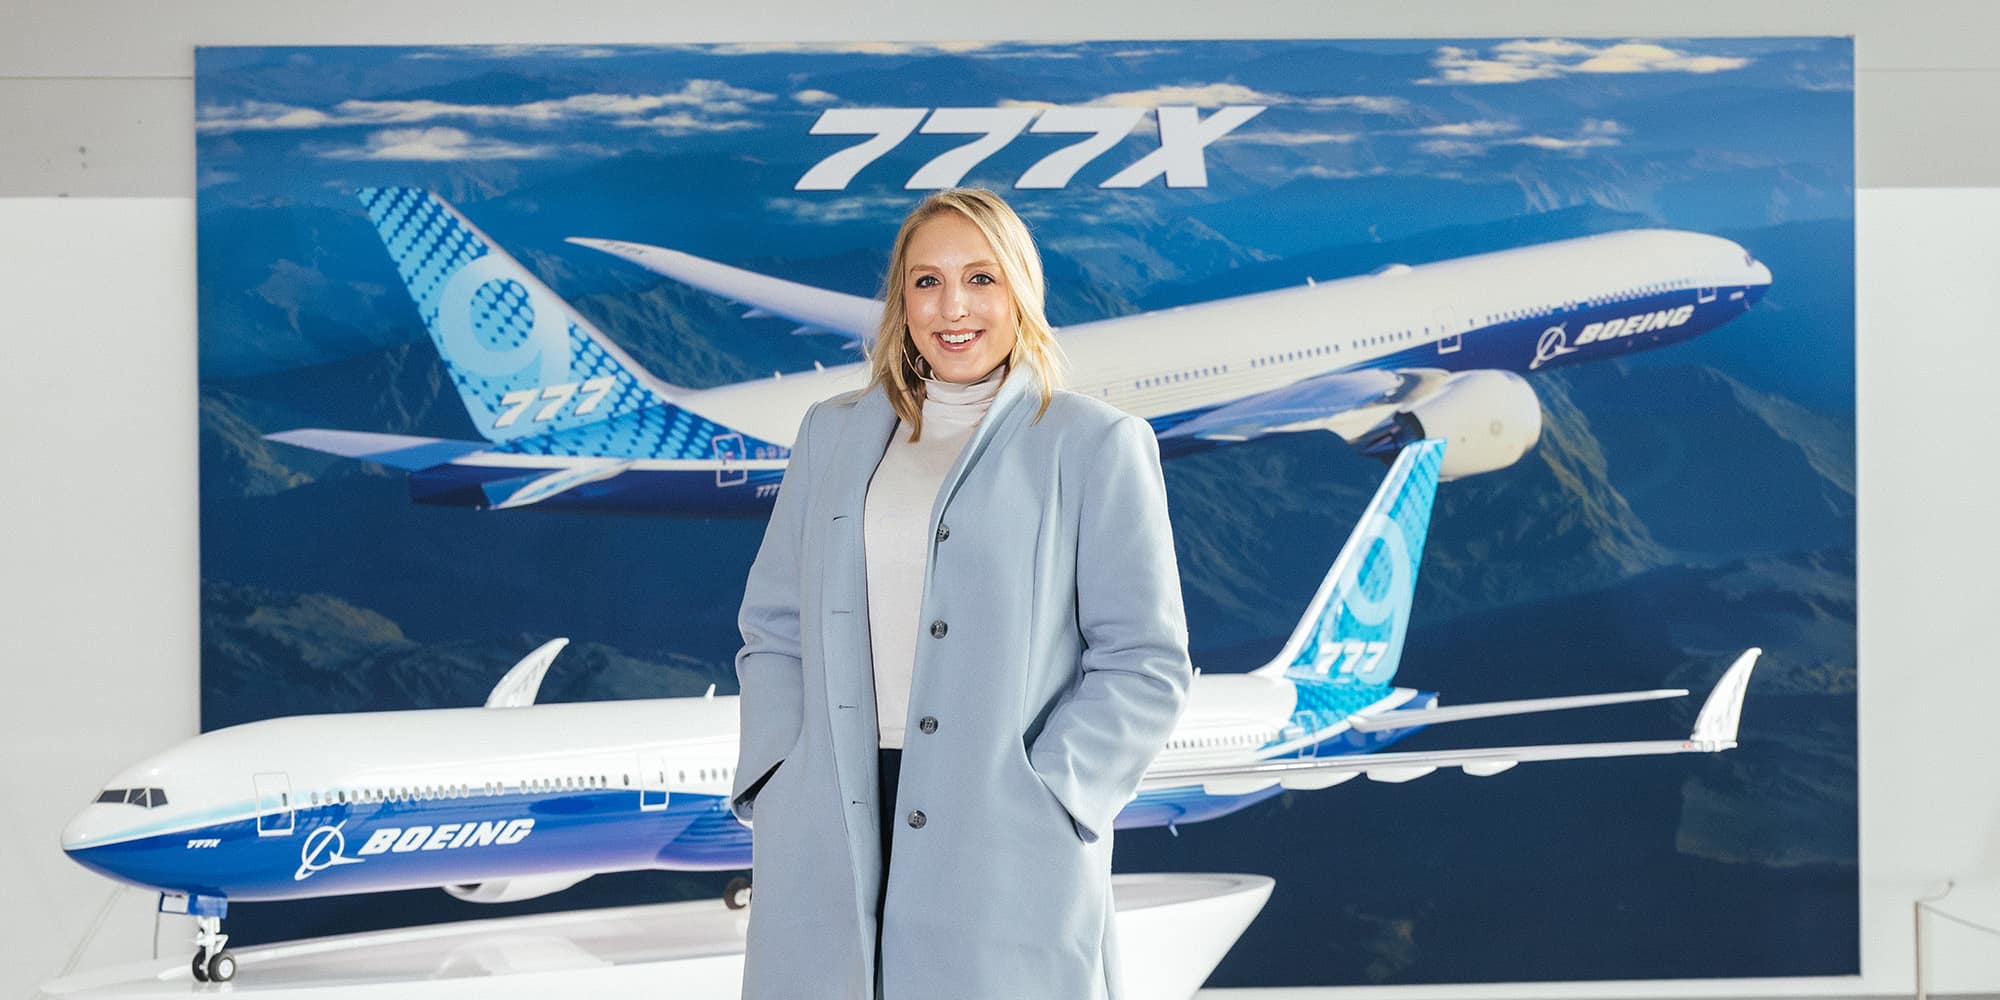 Rachelle Strong, shown here in front of a model of the 777X, is the Flight Deck Chief Engineer at Boeing Commercial Airplanes.